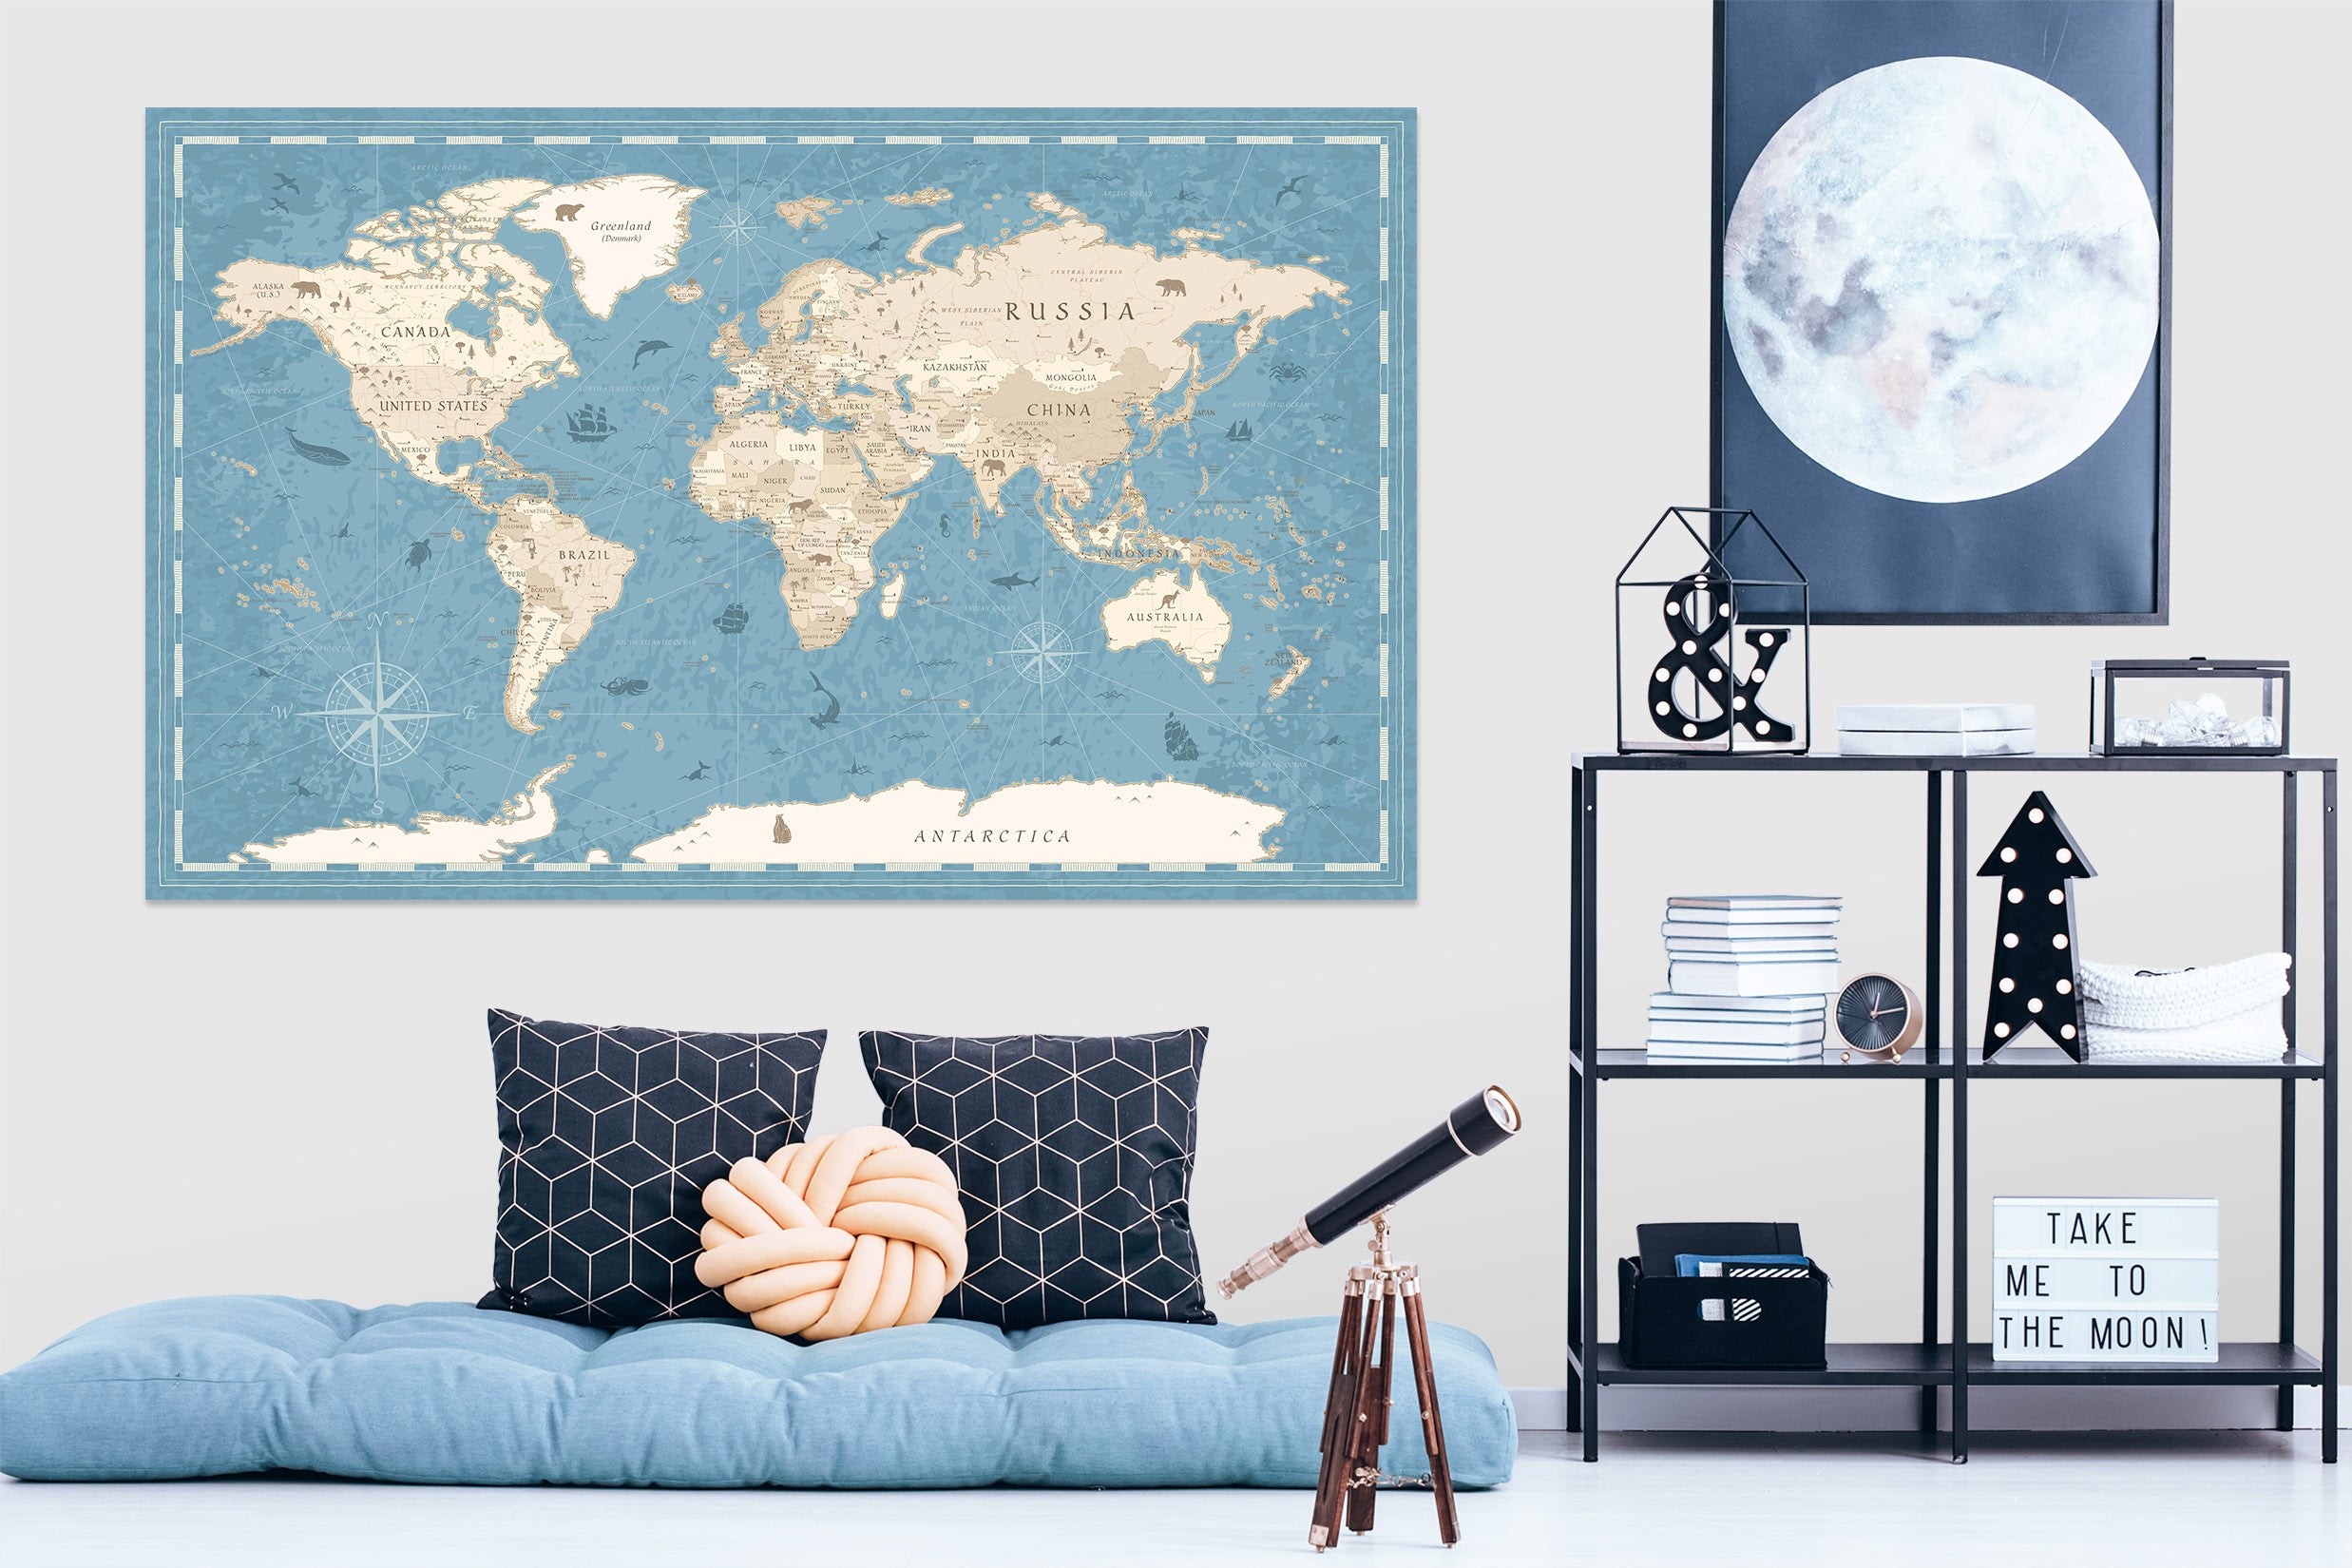 3D Abstract Clouds 286 World Map Wall Sticker